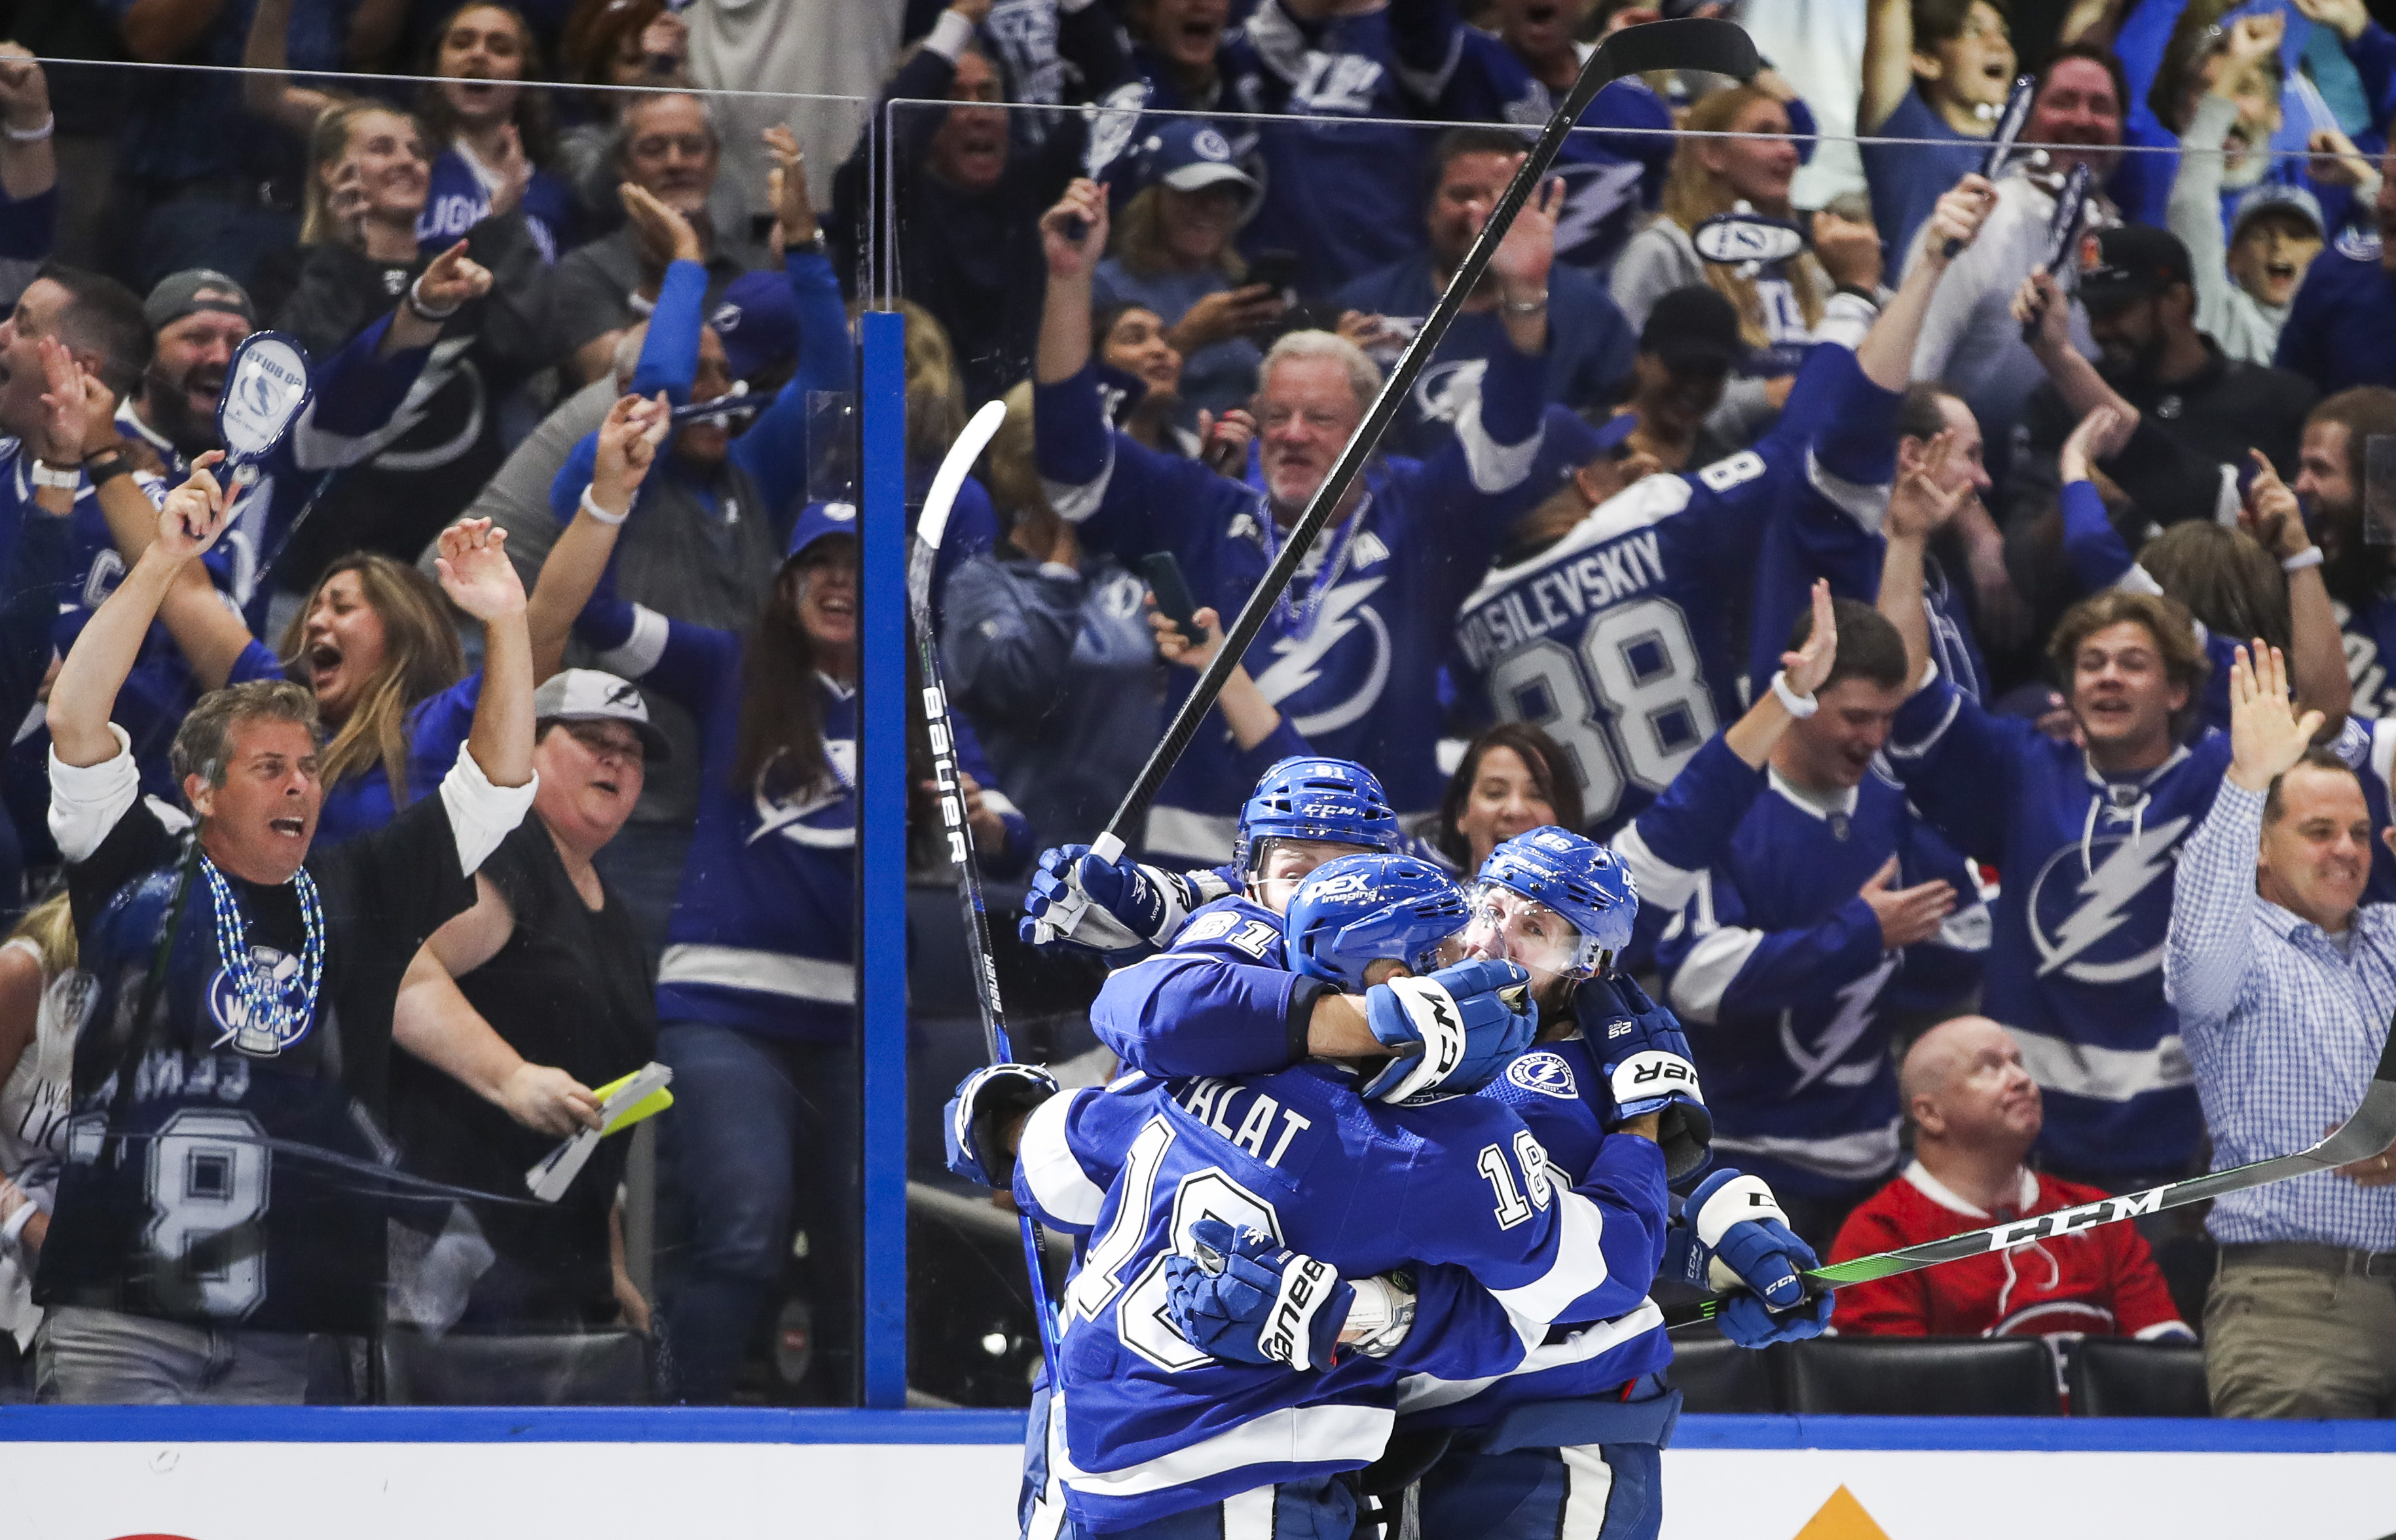 City Of Tampa, Fans Cheer On Bolts As NHL Playoffs Get Underway